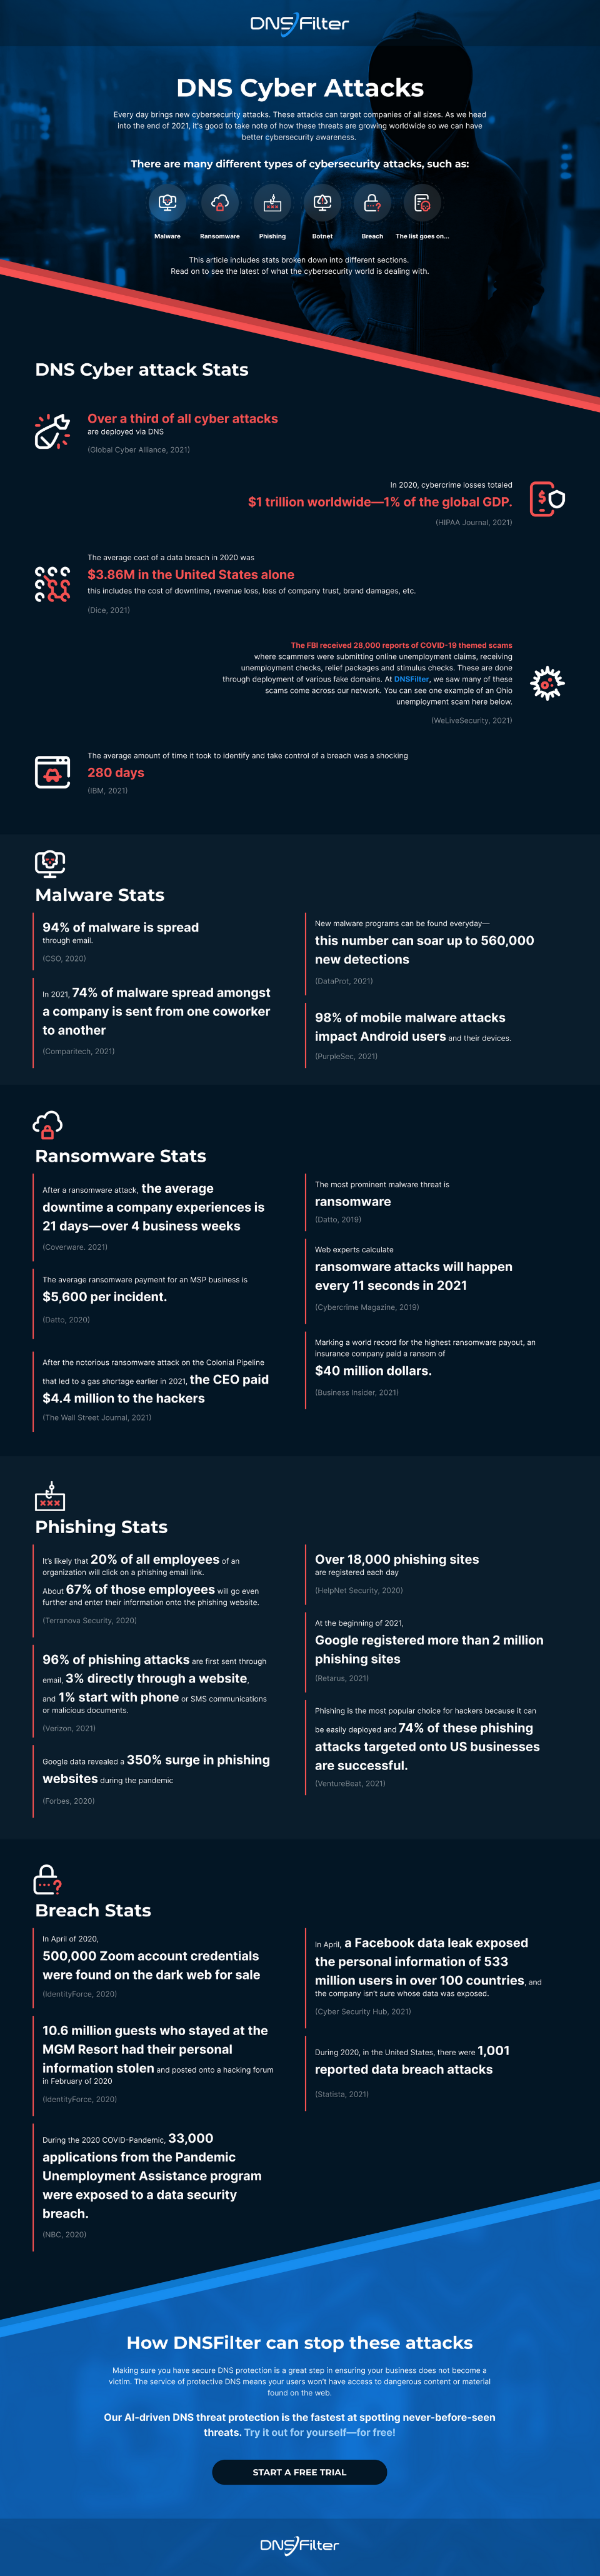 DNS cyber attack stats infographic malware breach phishing ransomware